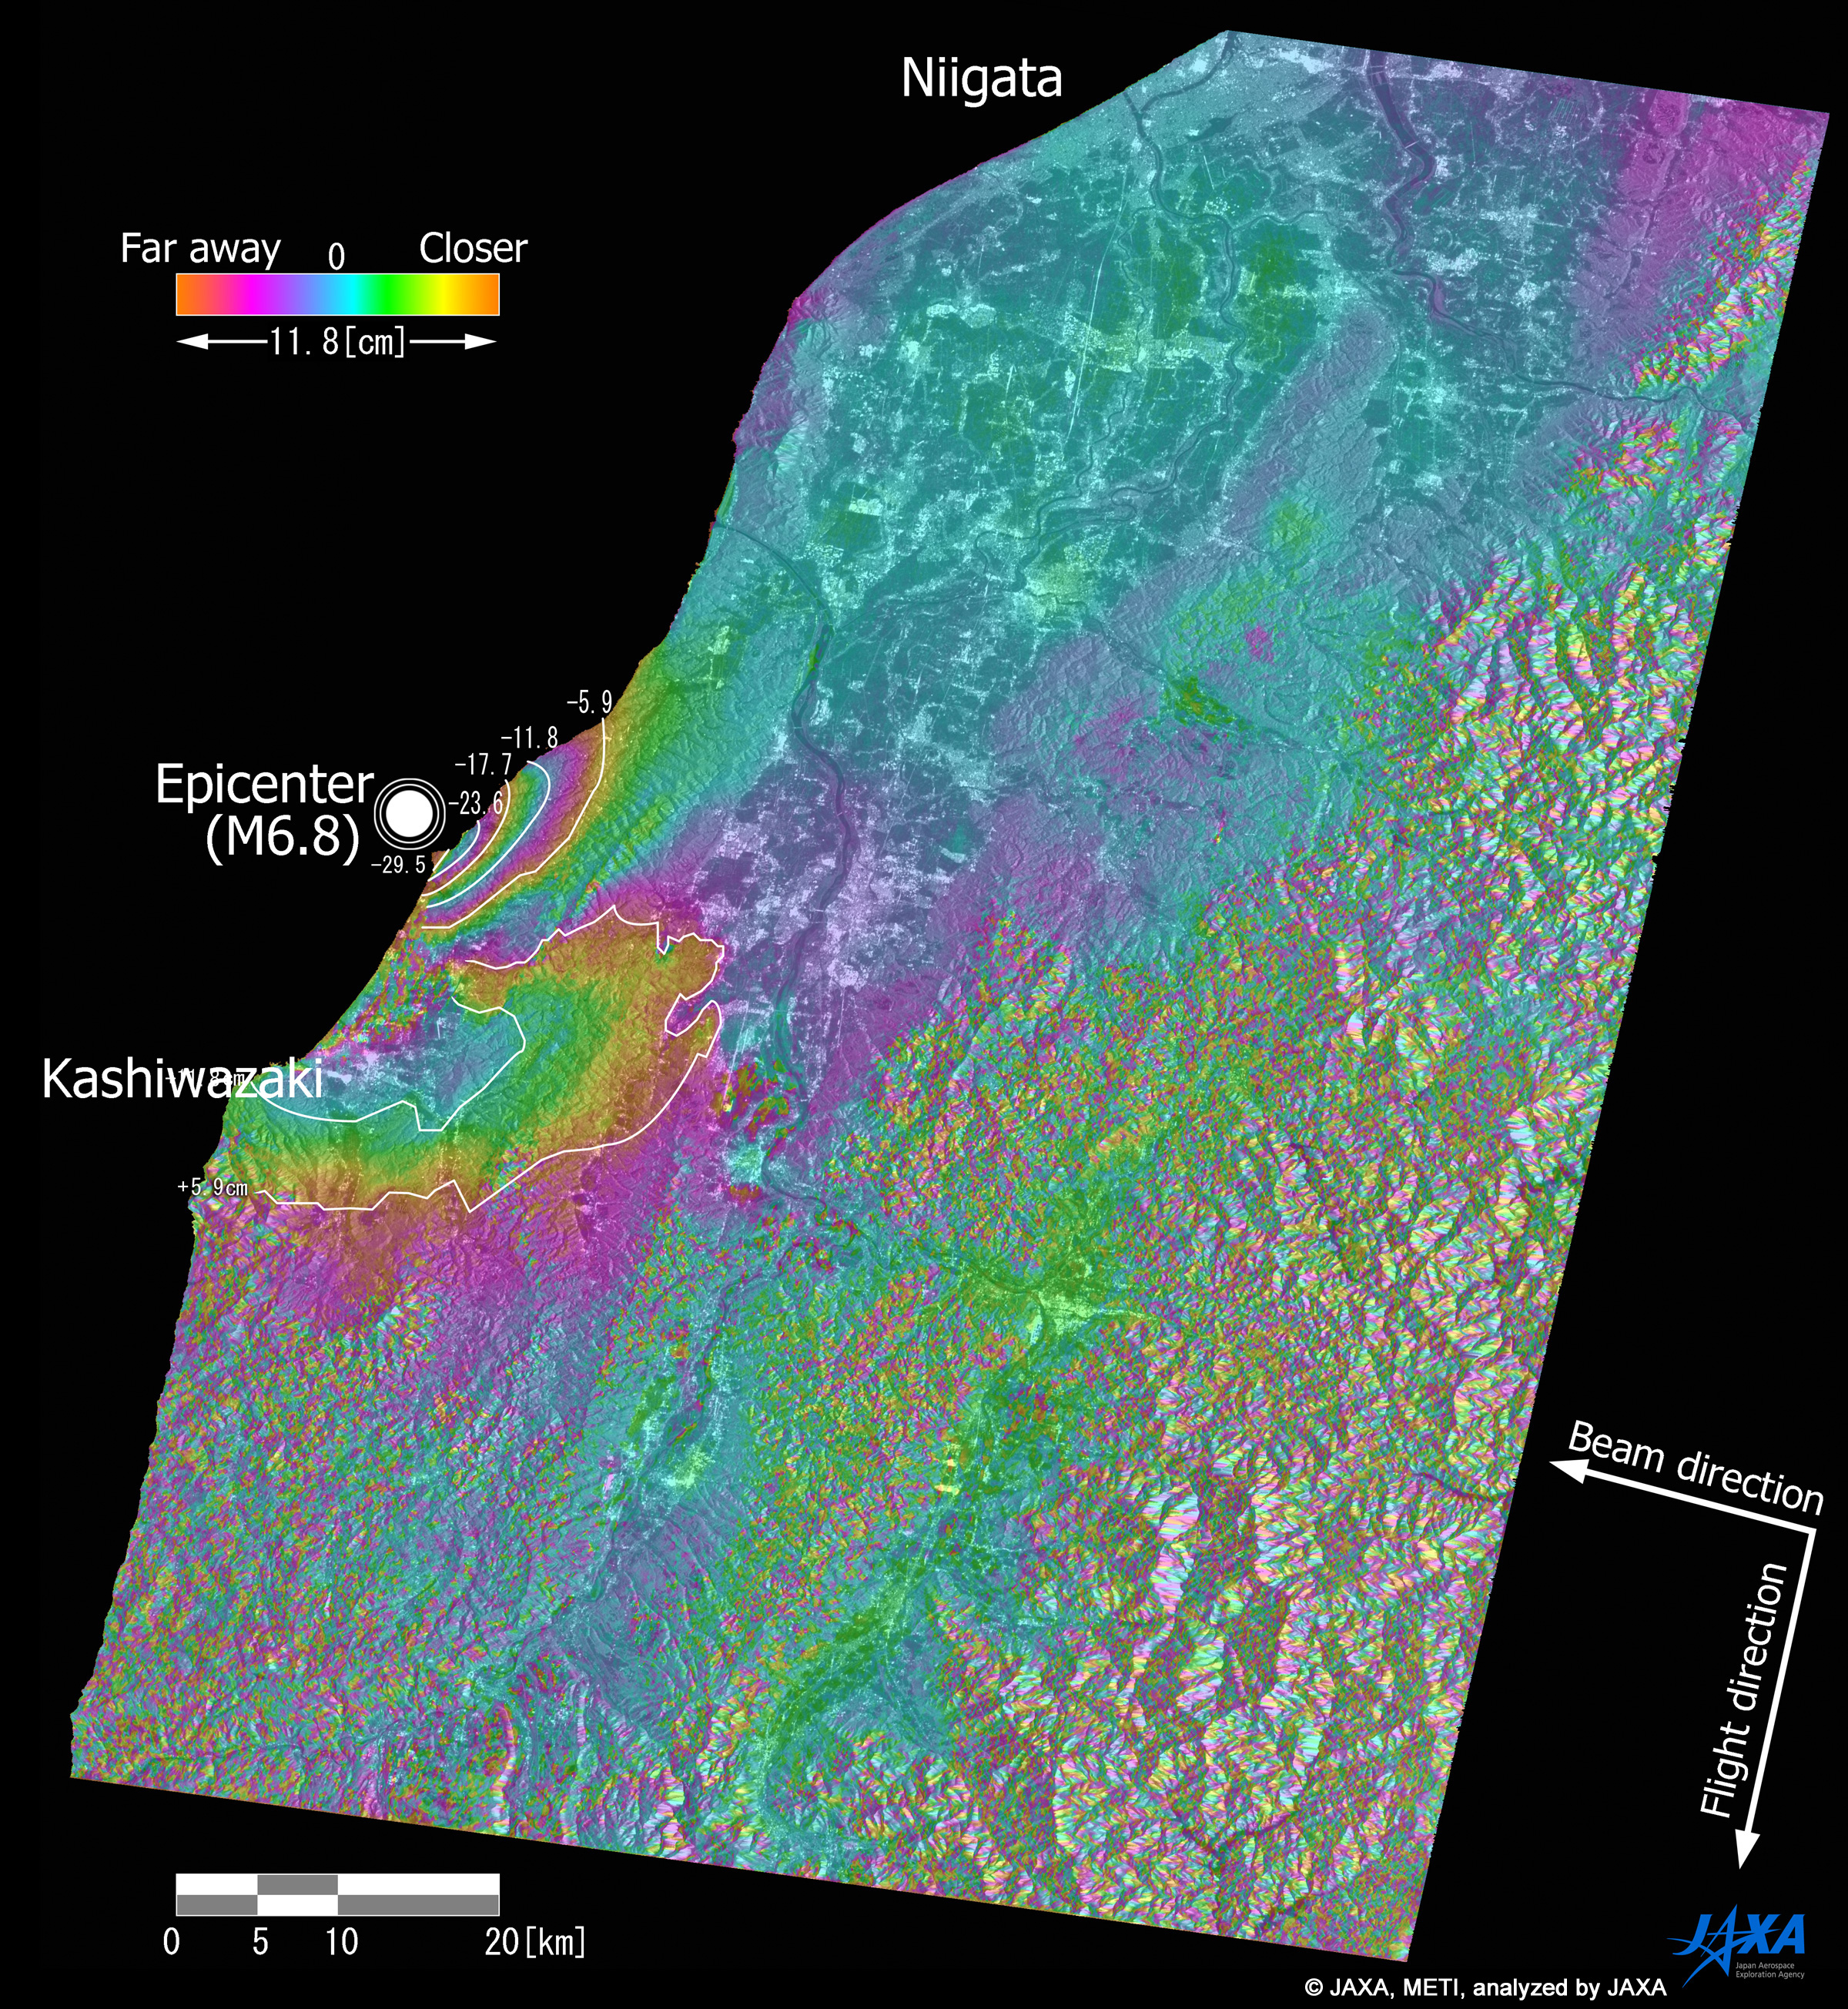 How to Look at Diastrophism Image (Observation Results of the Advanced Land Observing Satellite "Daichi" (ALOS) relating to 2007 Niigata-ken Chuetsu Offshore Earthquake)